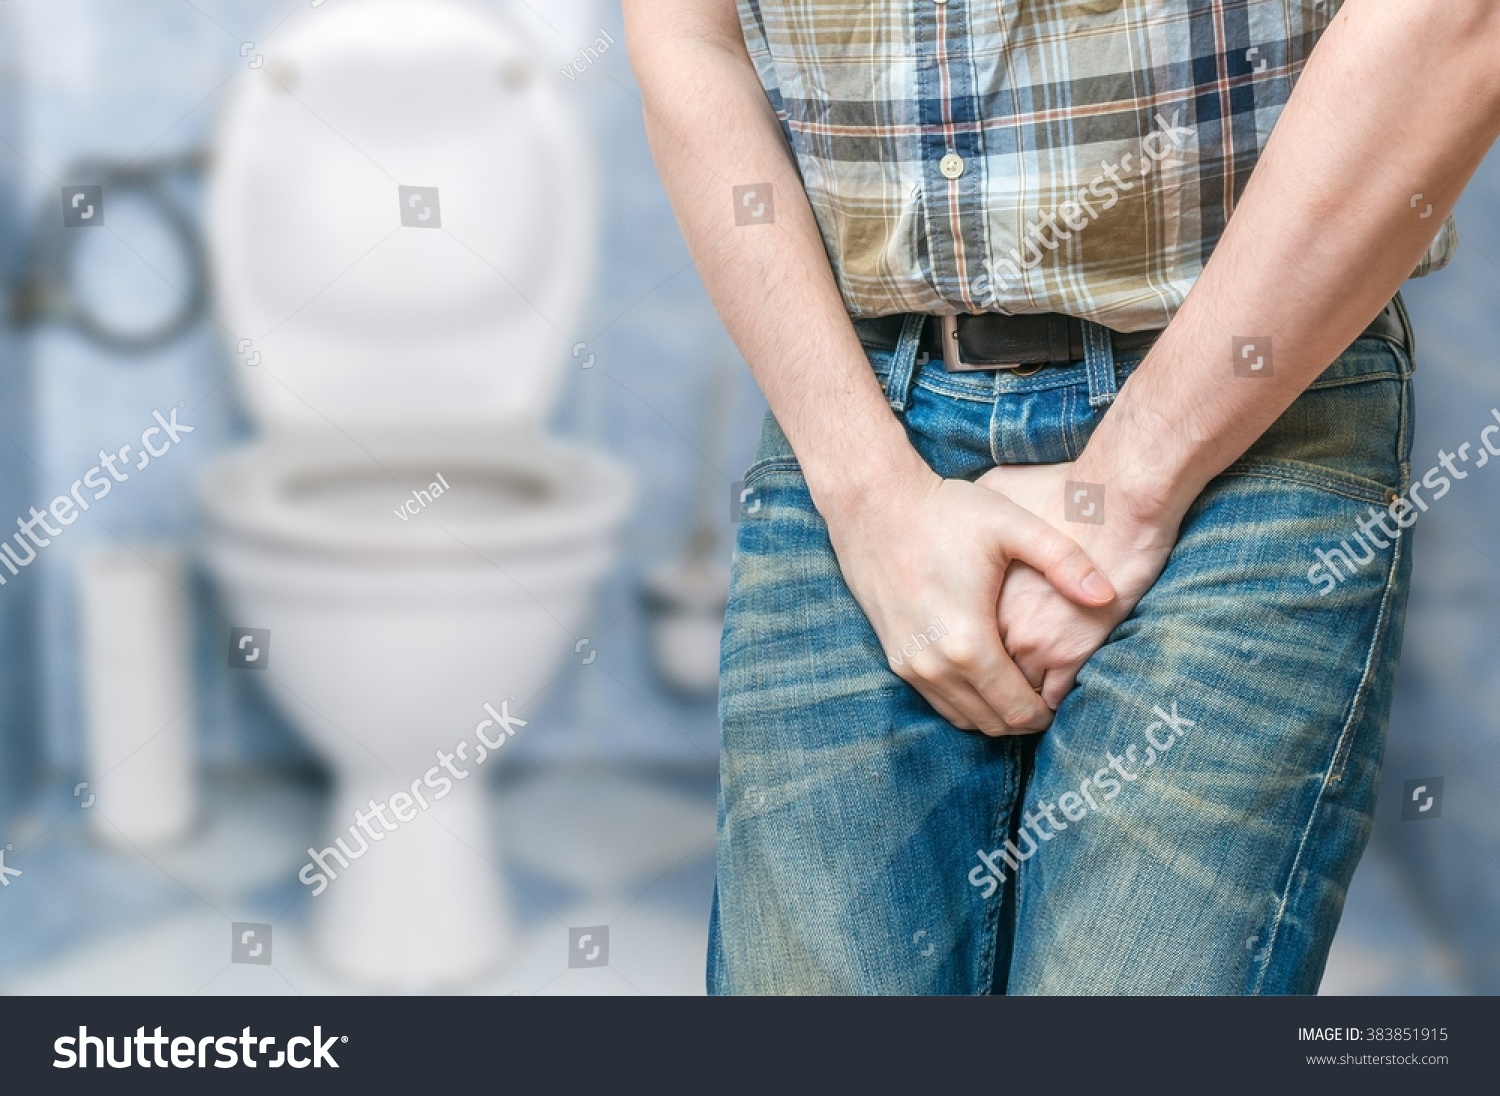 stock-photo-incontinence-concept-man-wants-to-pee-and-is-holding-his-bladde.jpg